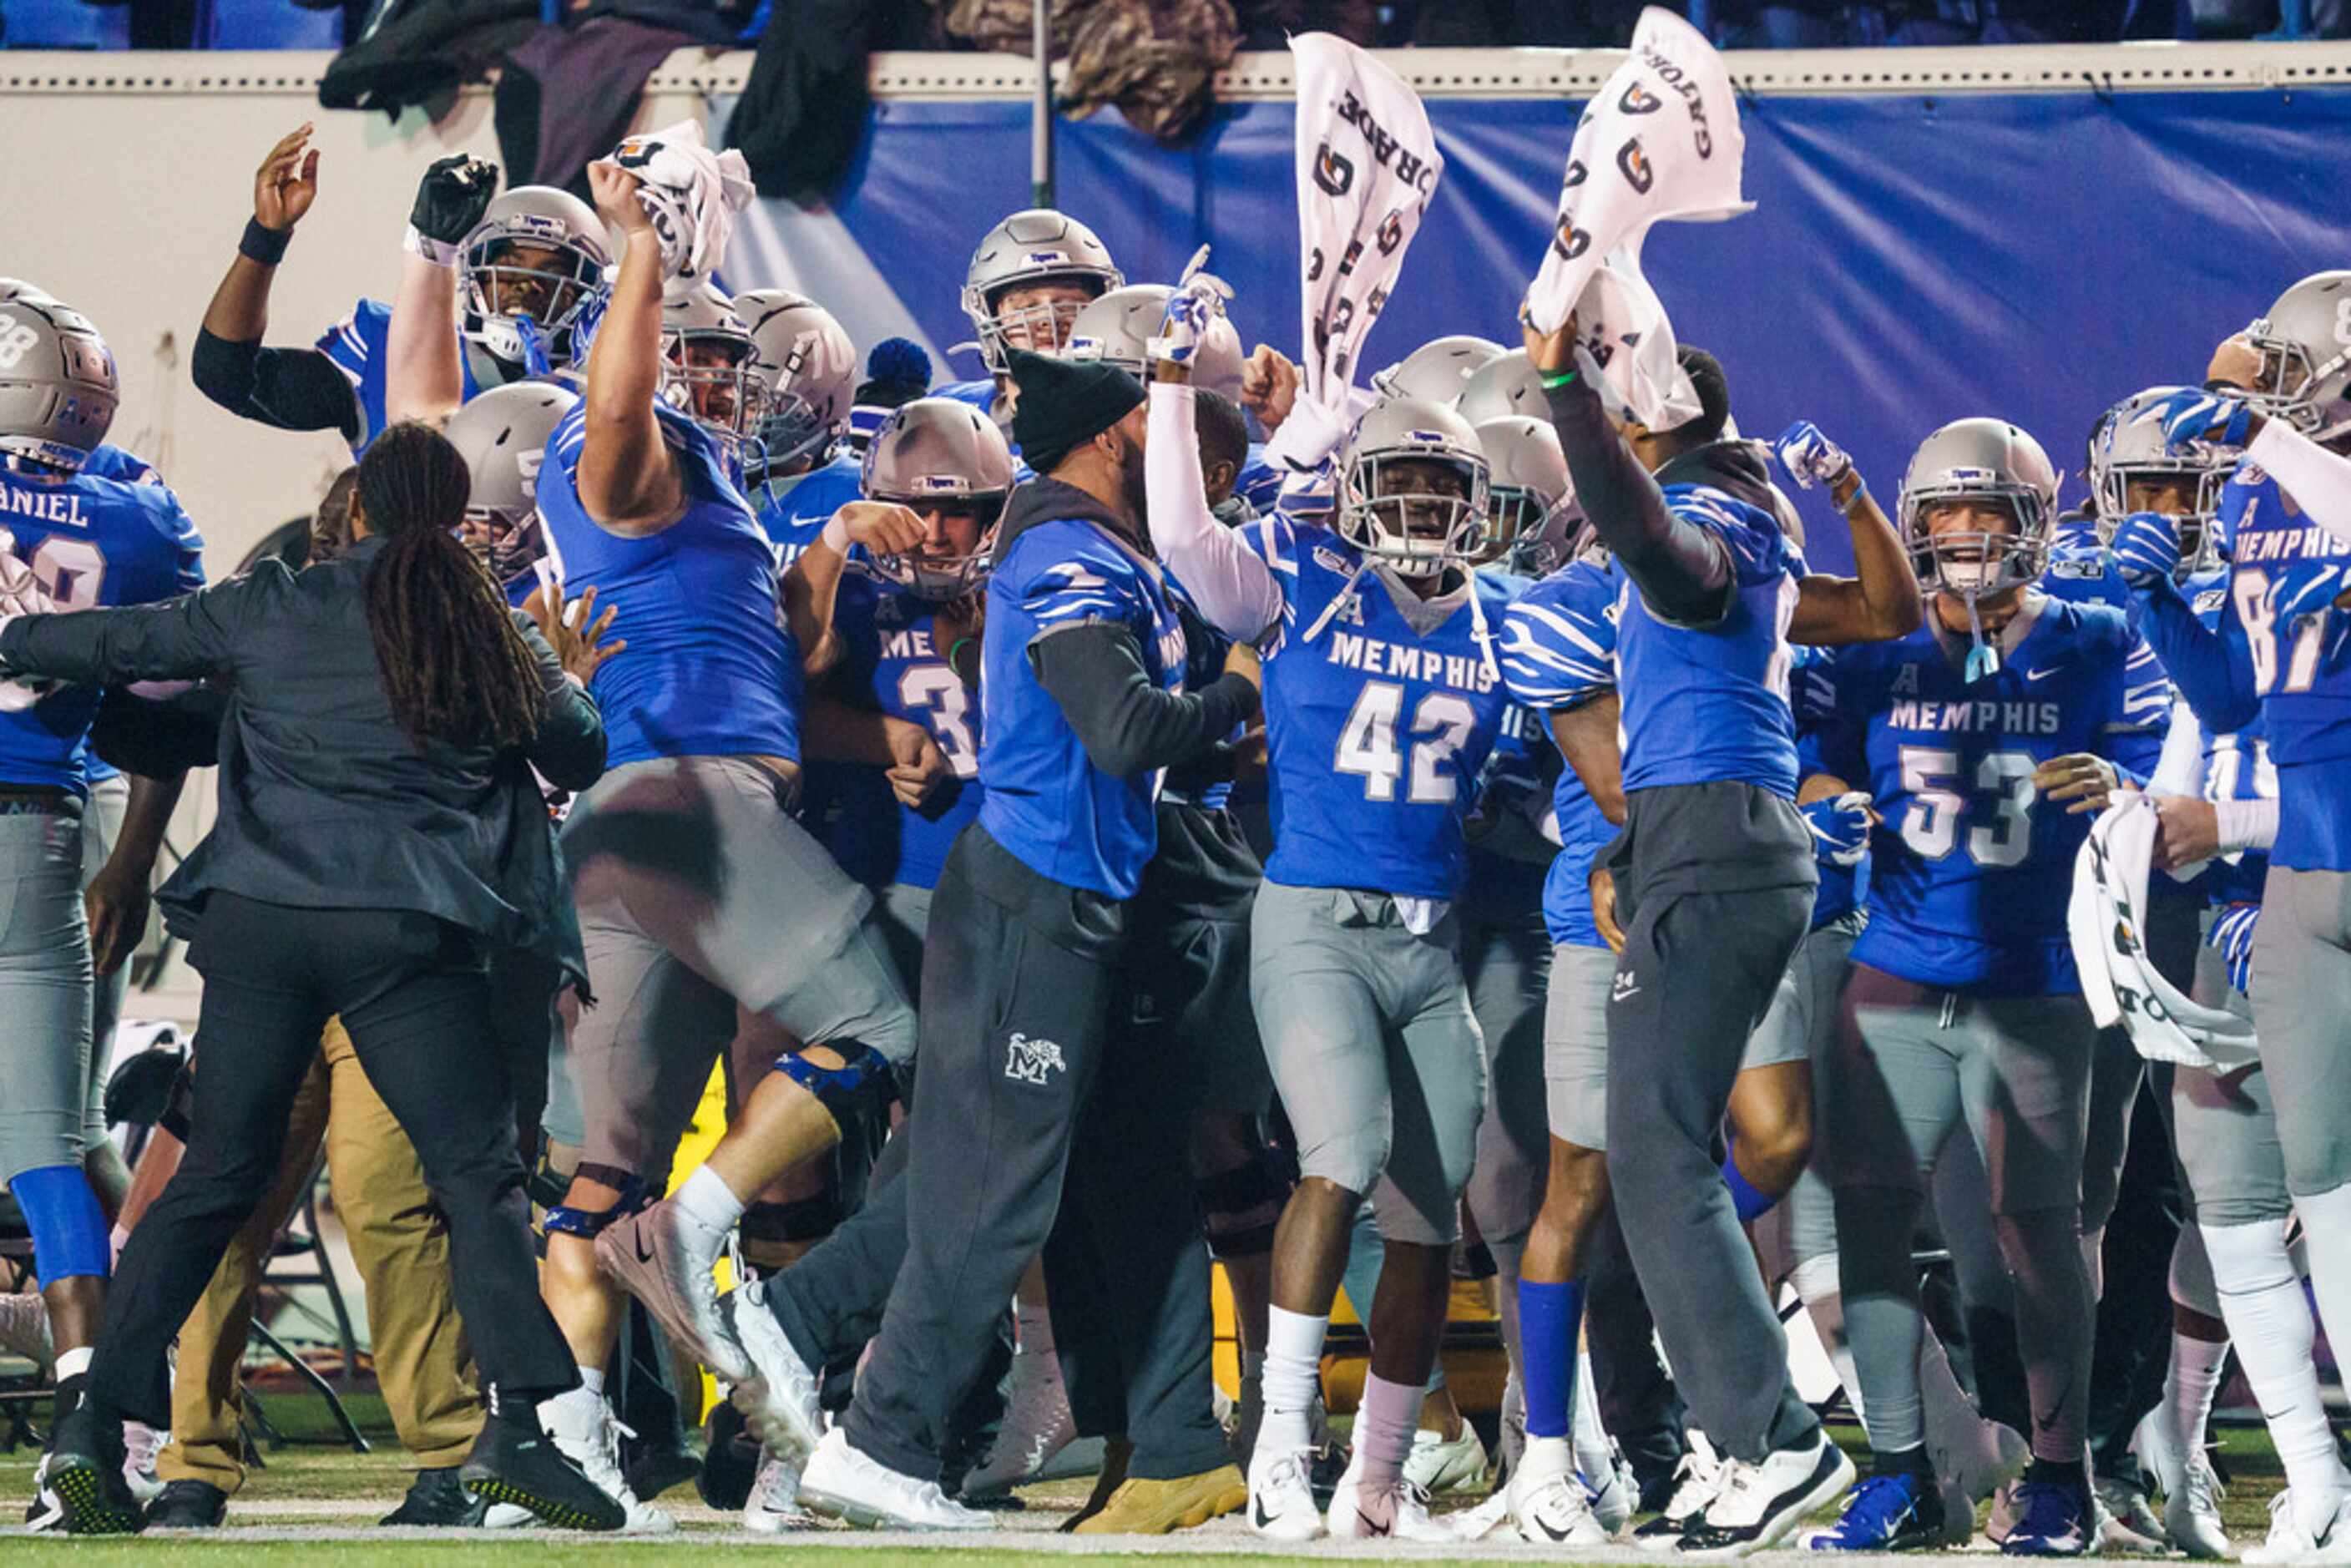 Memphis players whoop it up before the opening kickoff of an NCAA football game against SMU...